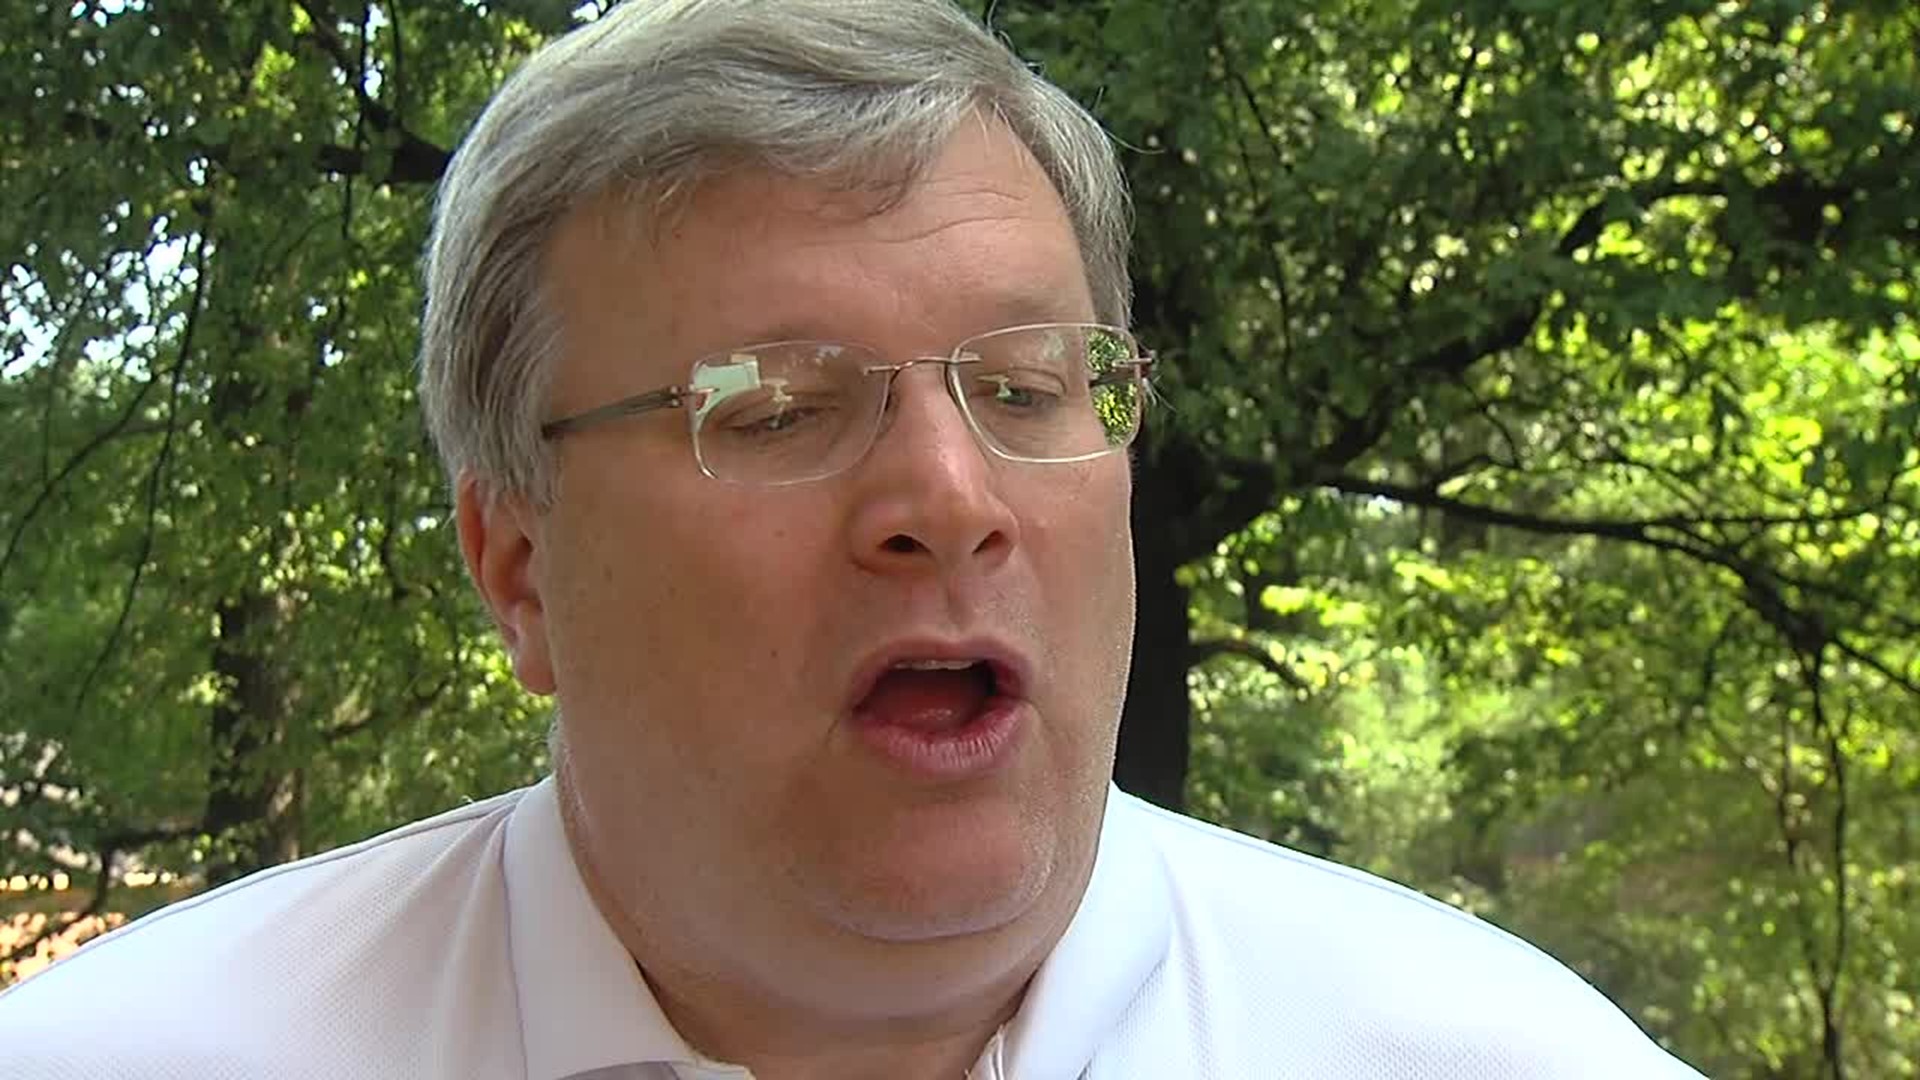 WEB EXTRA: Full interview with Memphis Mayor Jim Strickland on mayoral race